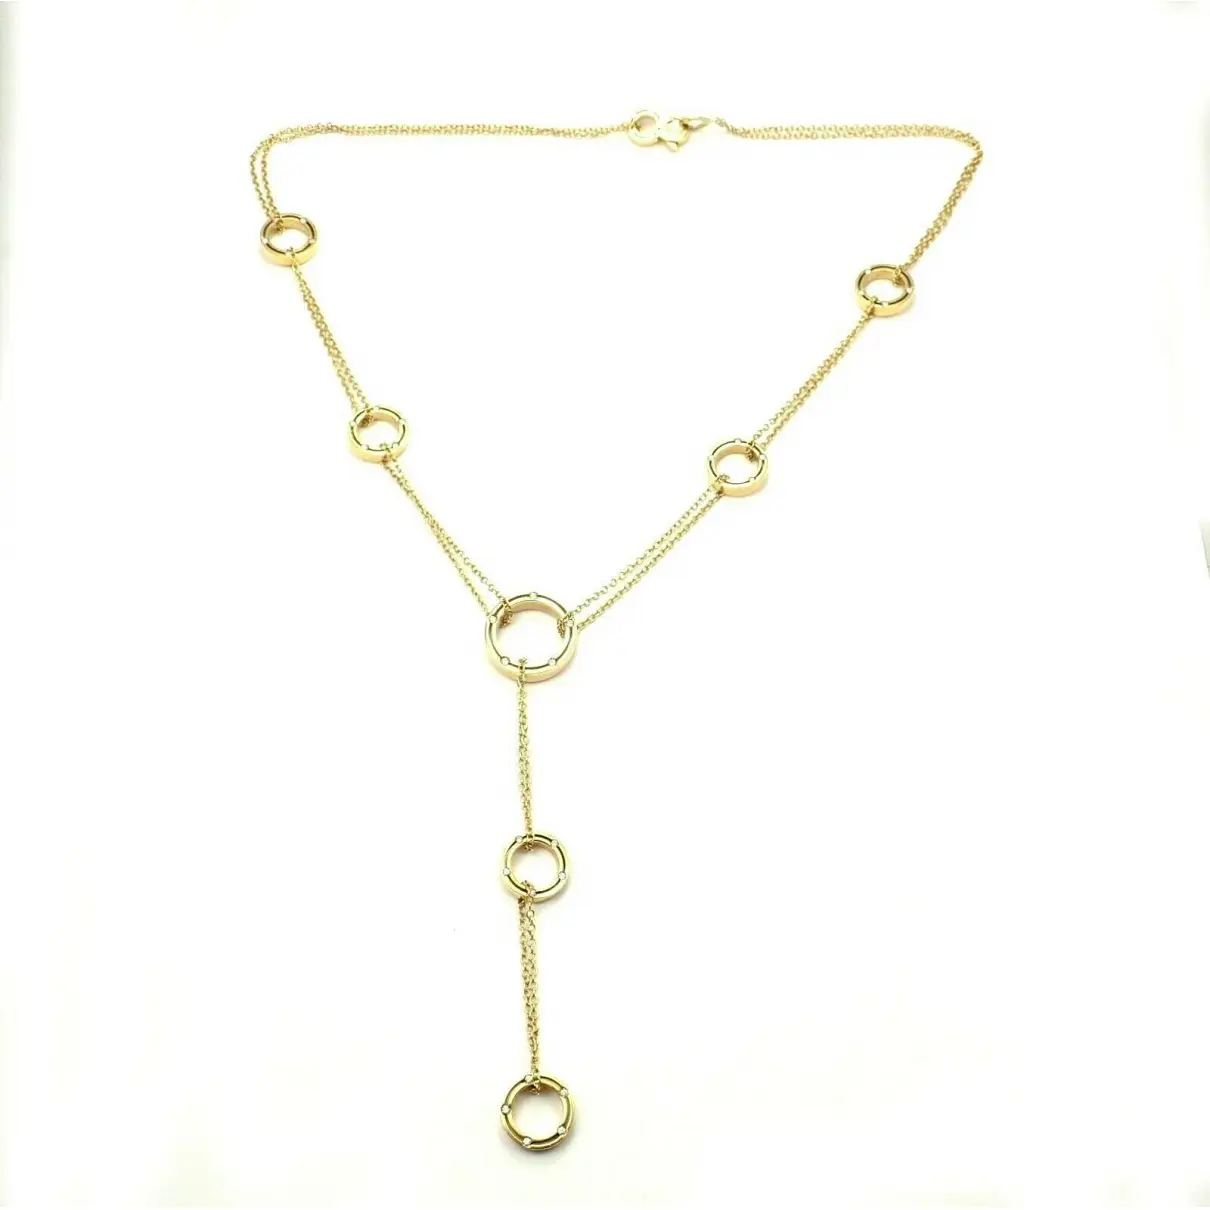 Buy Damiani Yellow gold necklace online